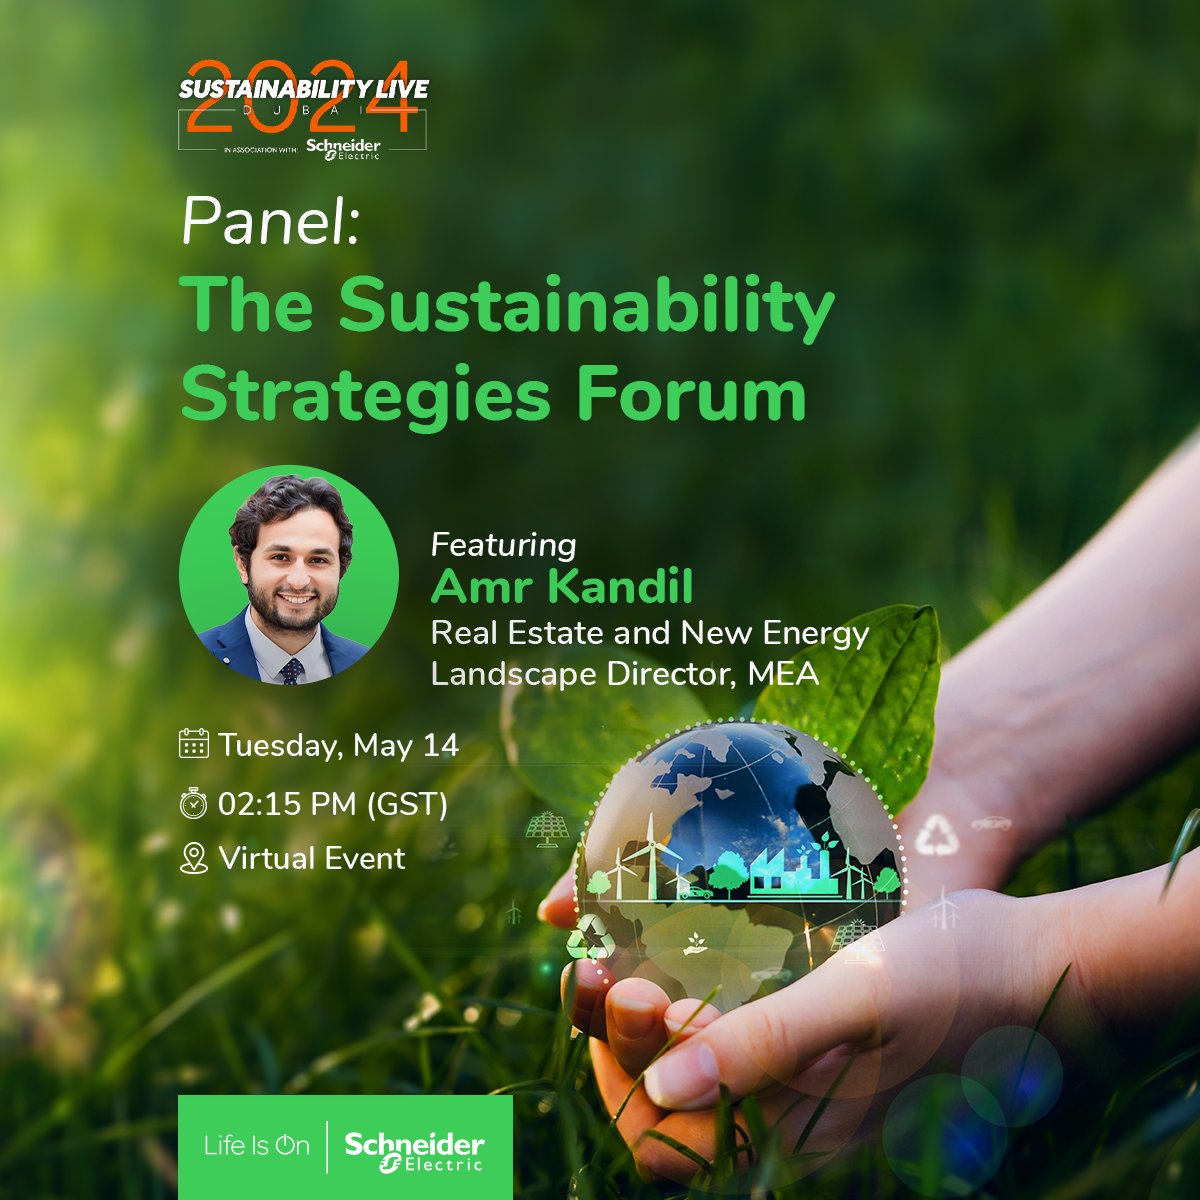 Join The Sustainability Strategies Forum at the Sustainability Live Dubai 2024 with Amr Kandil, Real Estate and New Energy Landscape Director, MEA, Schneider Electric.

This virtual event

Mark your calendars for Tuesday, May 14,2024  02:15 PM, and join the event here: